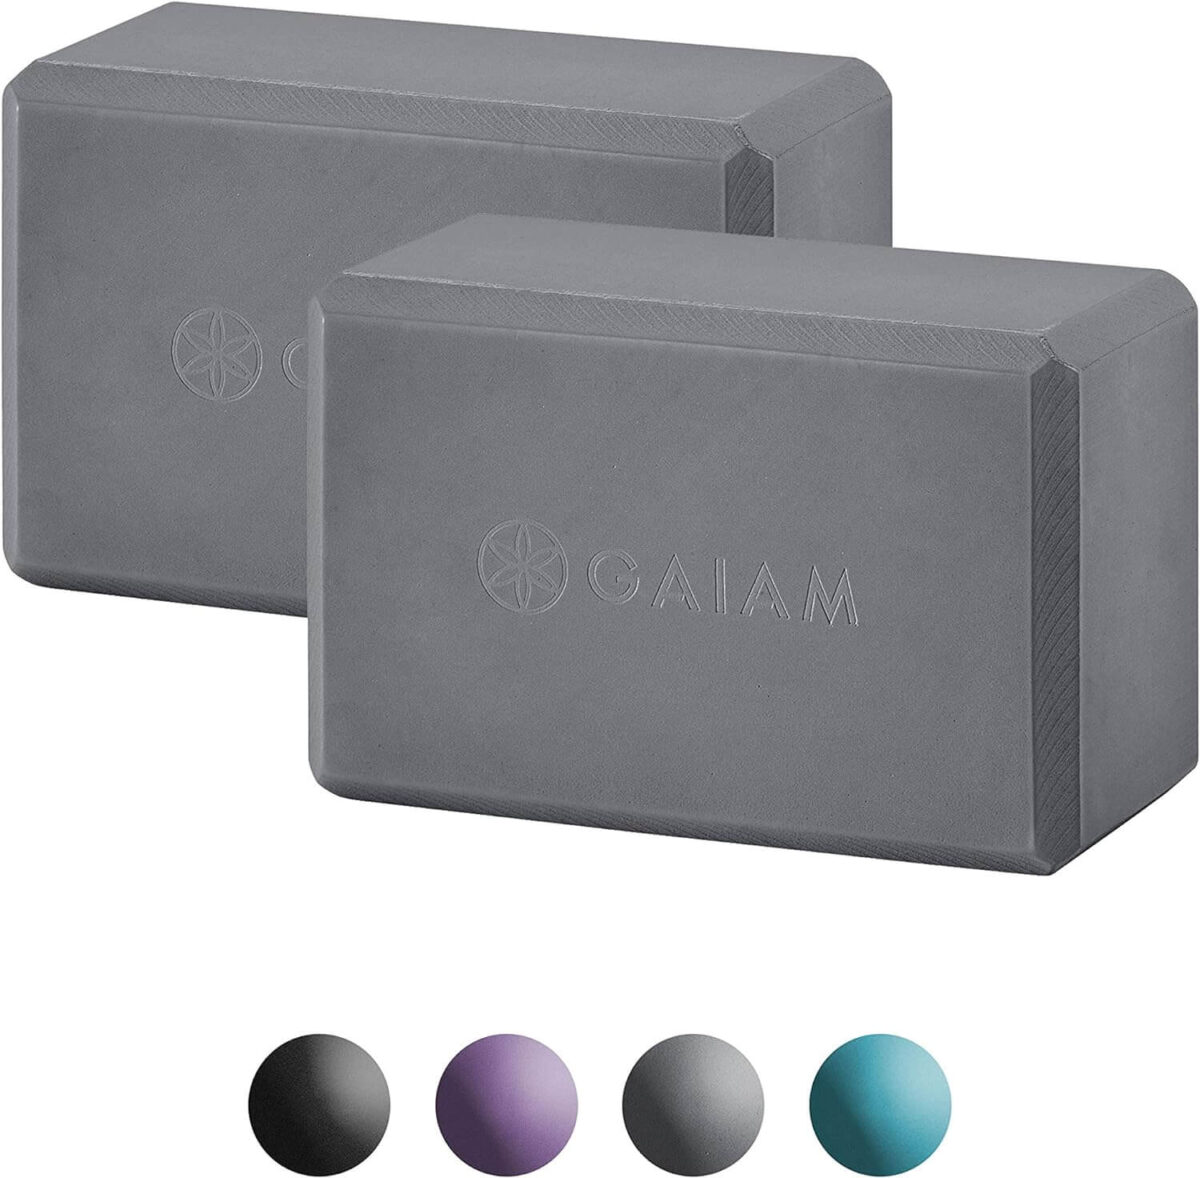 Featured Image for Gaiam Essentials Yoga Block (Set Of 2) – Supportive, Soft Non-Slip Foam Surface For Yoga, Pilates, Meditation